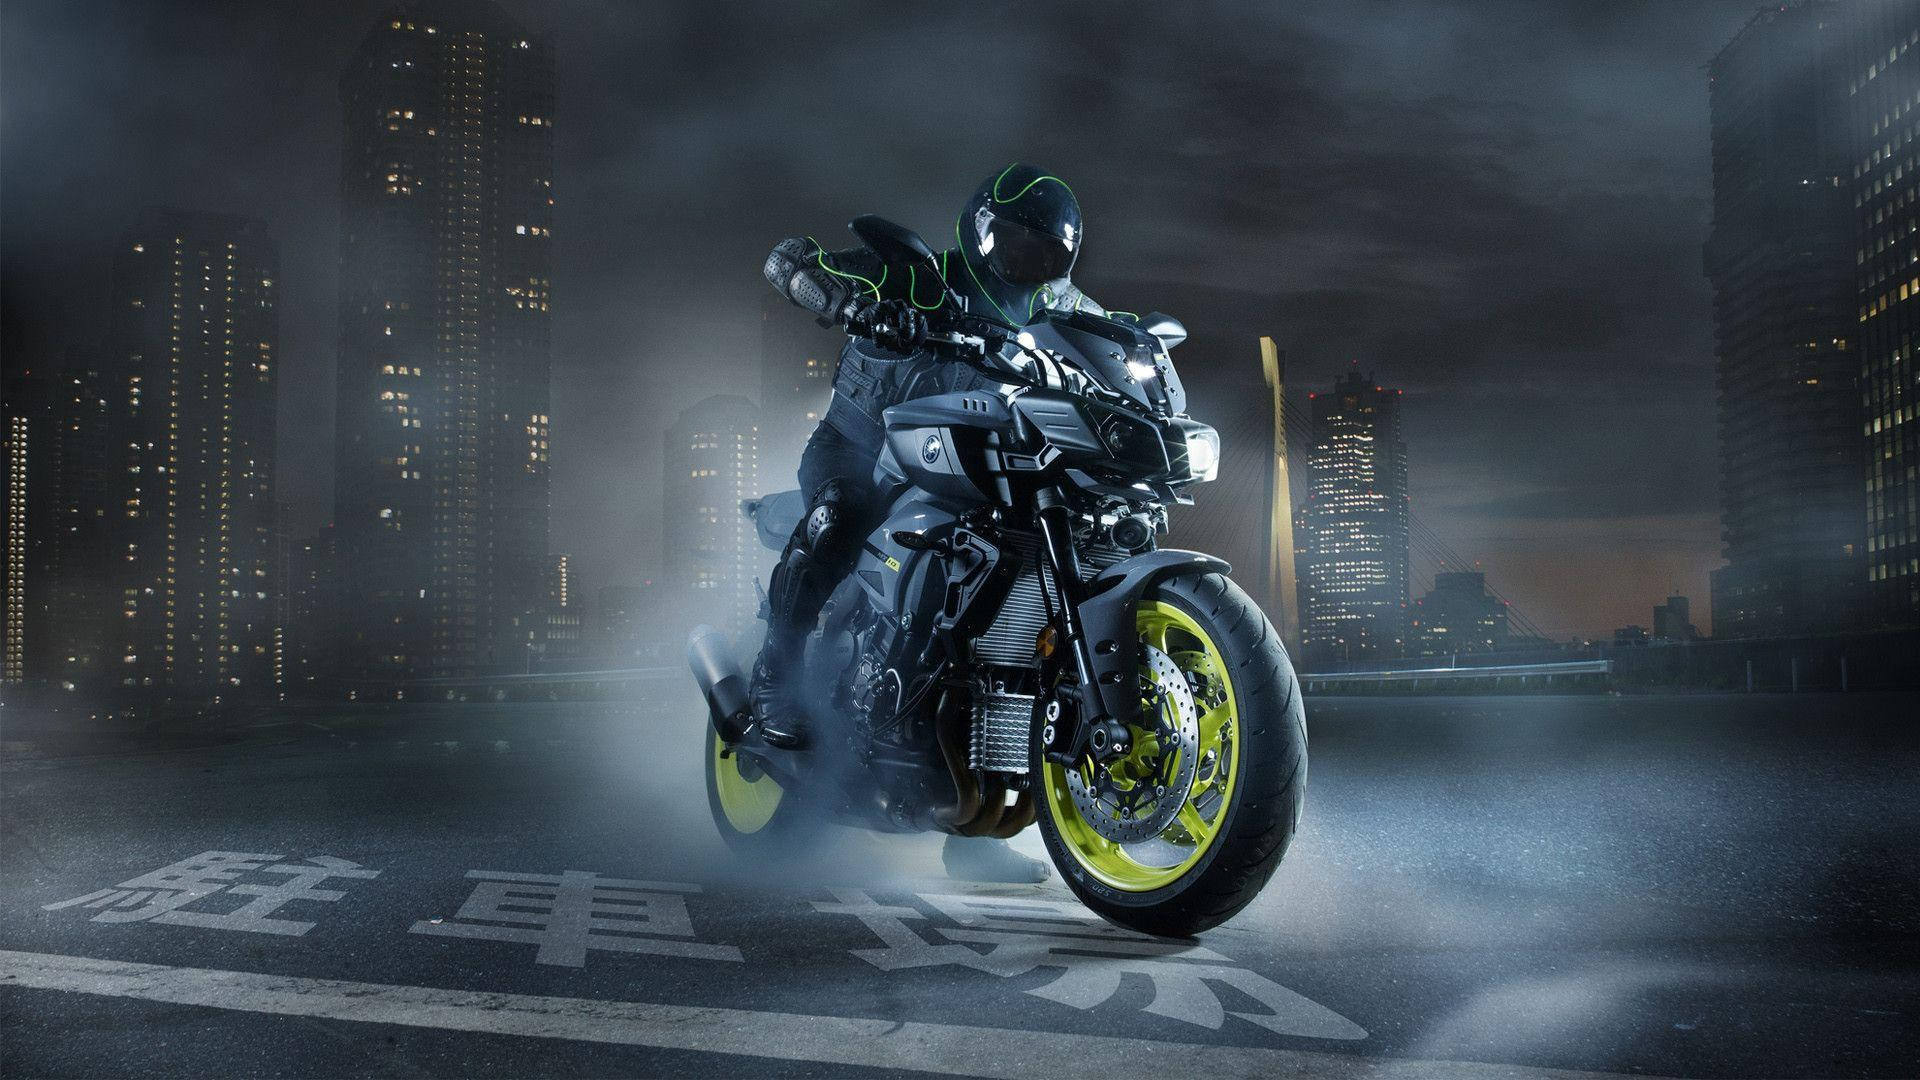 Thrilling Ride On The Yamaha Mt 15 Motorcycle Background